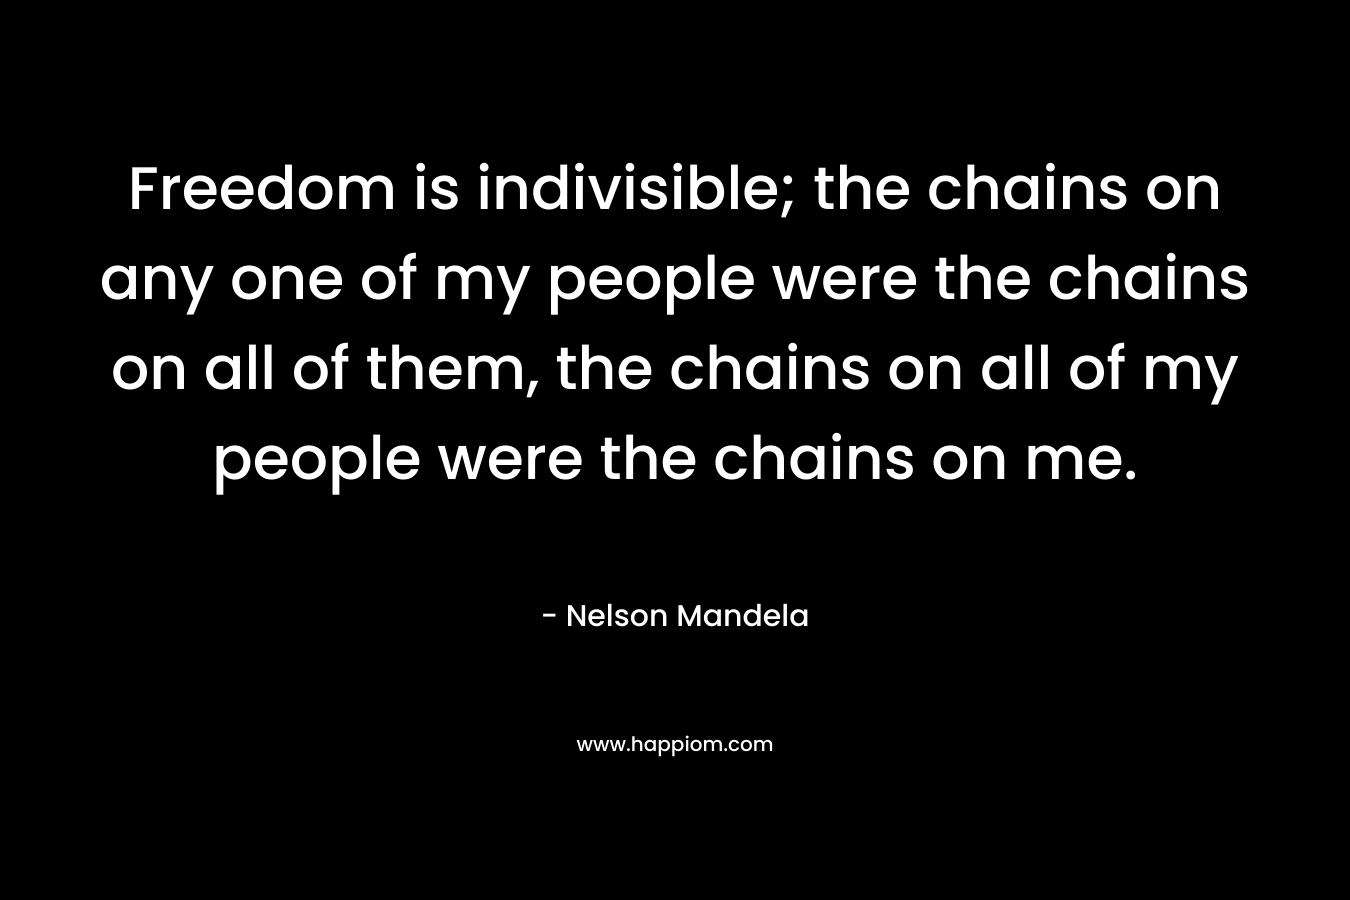 Freedom is indivisible; the chains on any one of my people were the chains on all of them, the chains on all of my people were the chains on me.